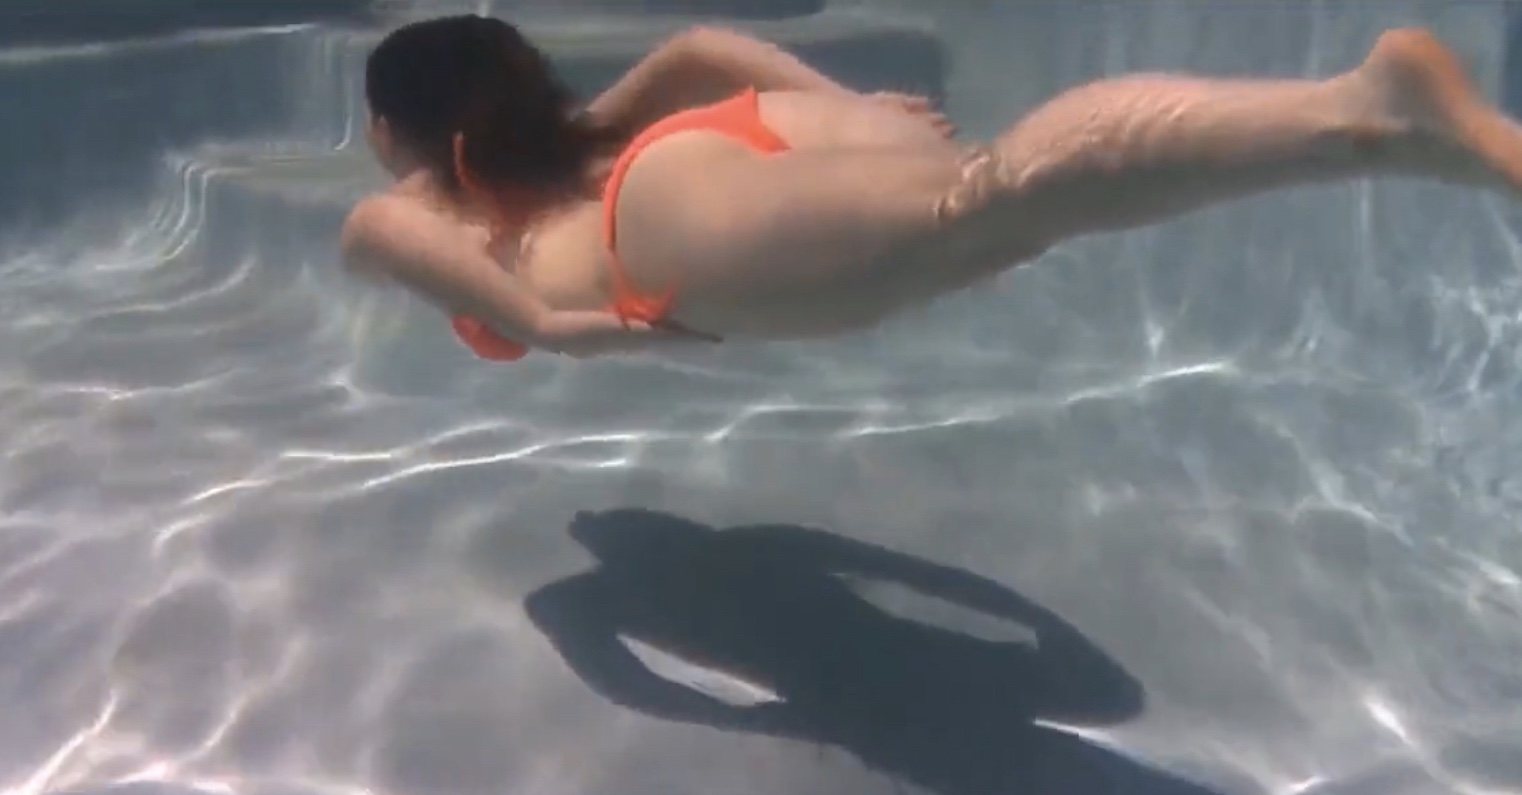 Nude Amputee at pool